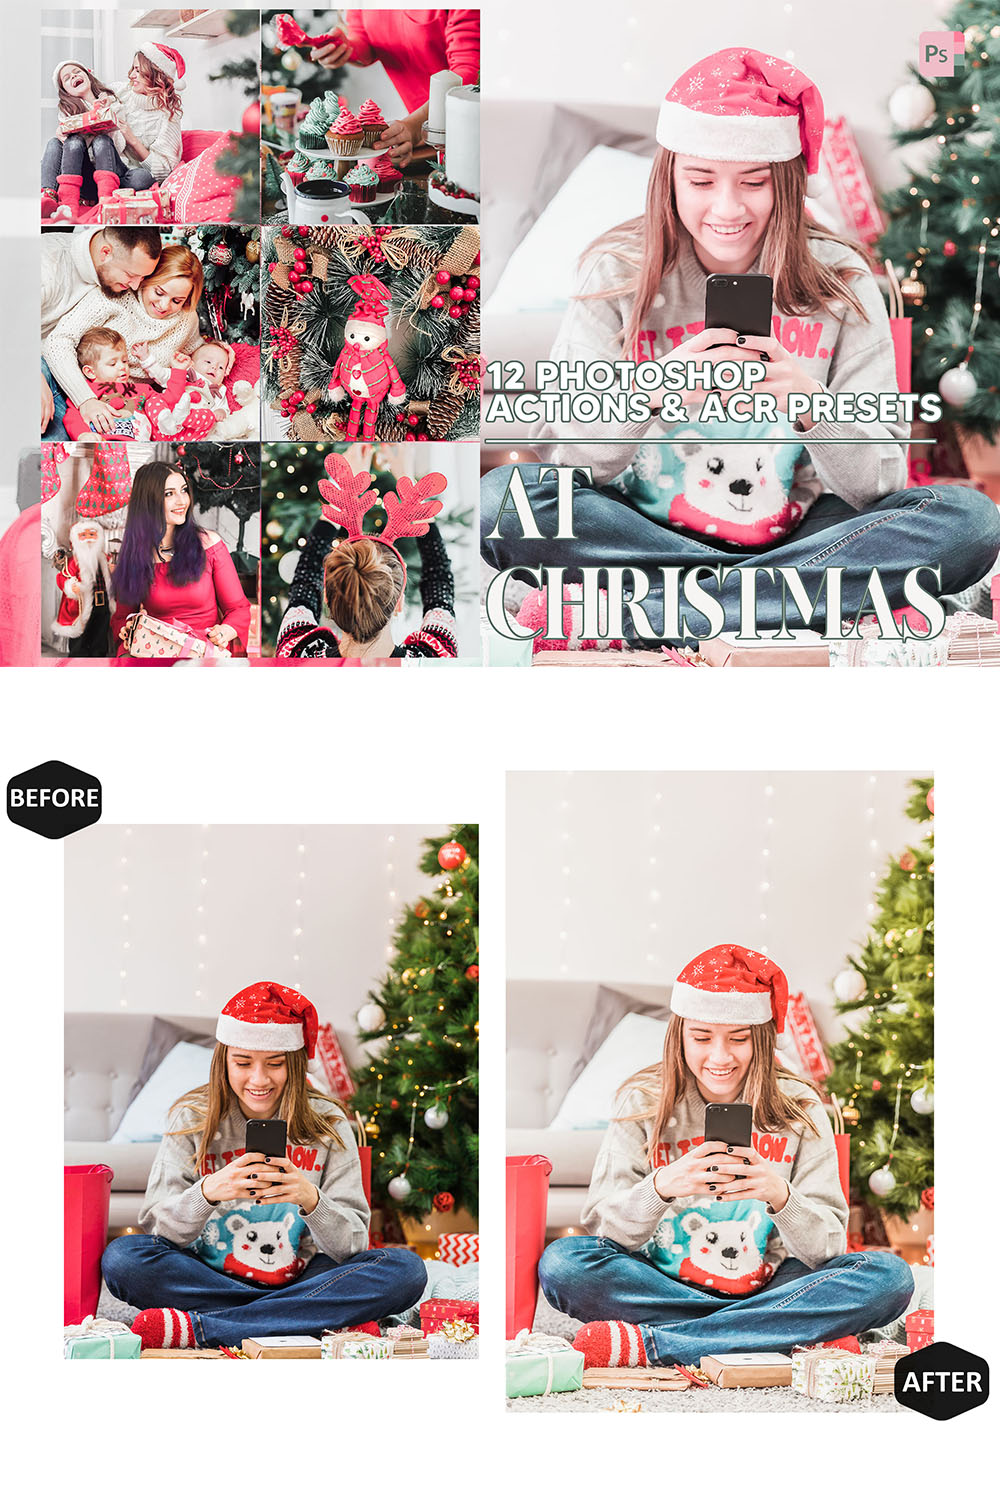 12 Photoshop Actions, At Christmas Ps Action, Winter ACR Preset, Bright Ps Filter, Atn Portrait And Lifestyle Theme For Instagram, Blogger pinterest preview image.